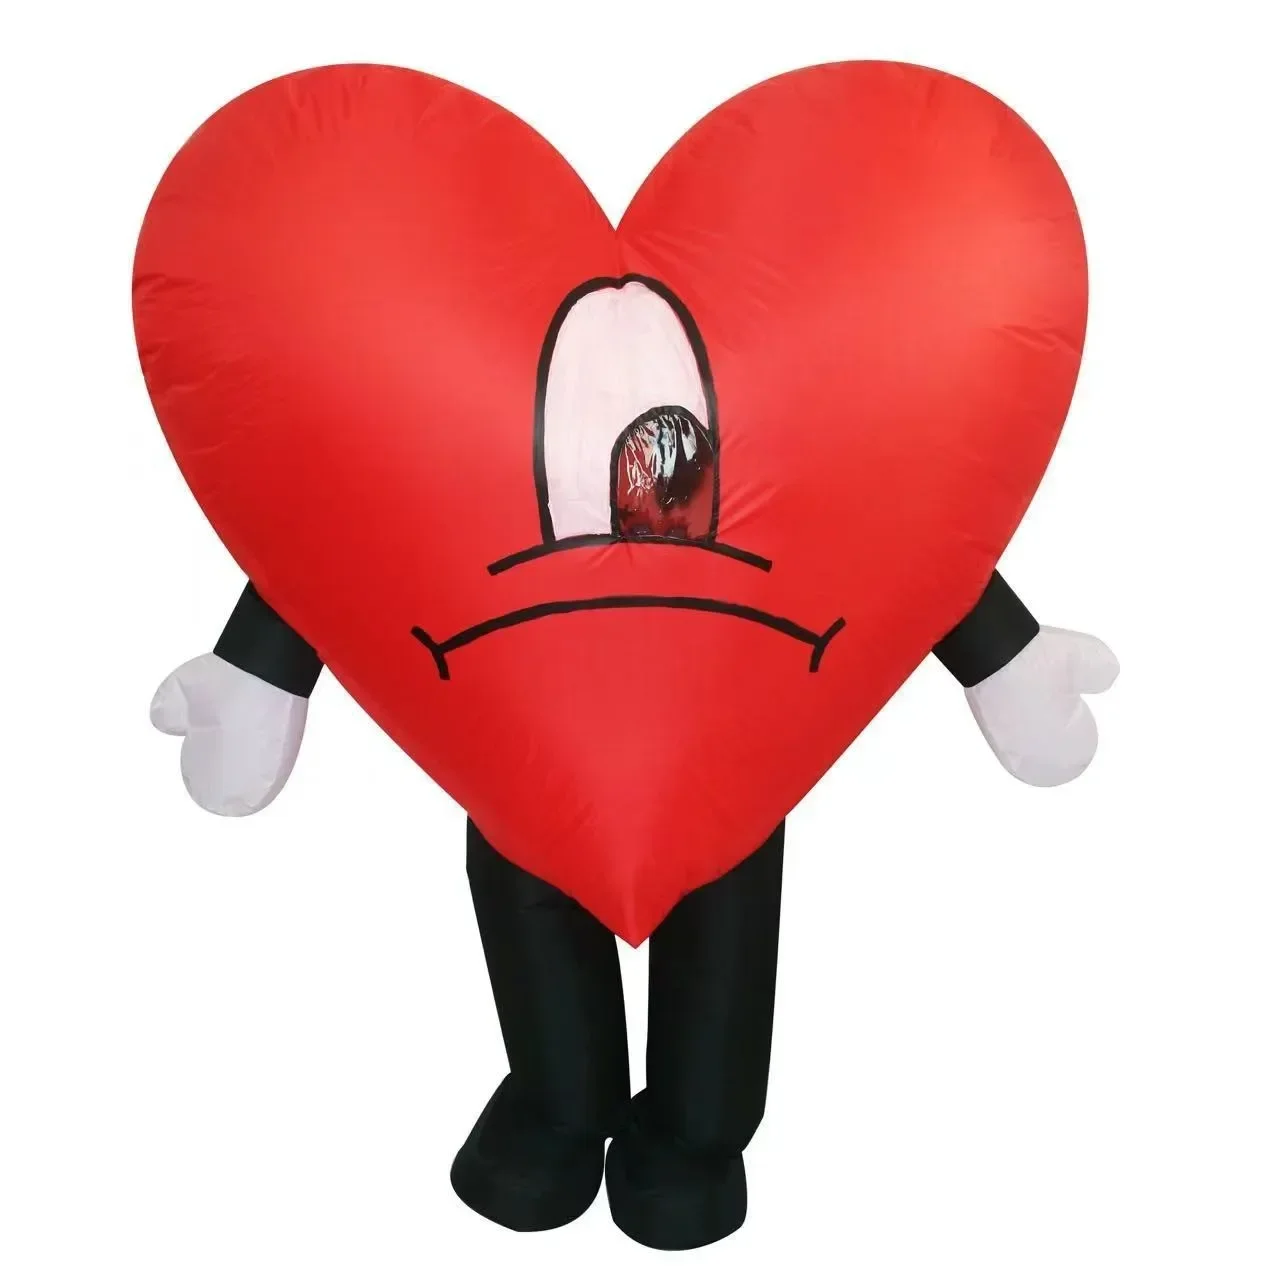 

Inflatable Red Love Heart Costume Blow Up Suit Mascot Costume Fun Adult Halloween Costume Valentines Christmas Party Cosplay